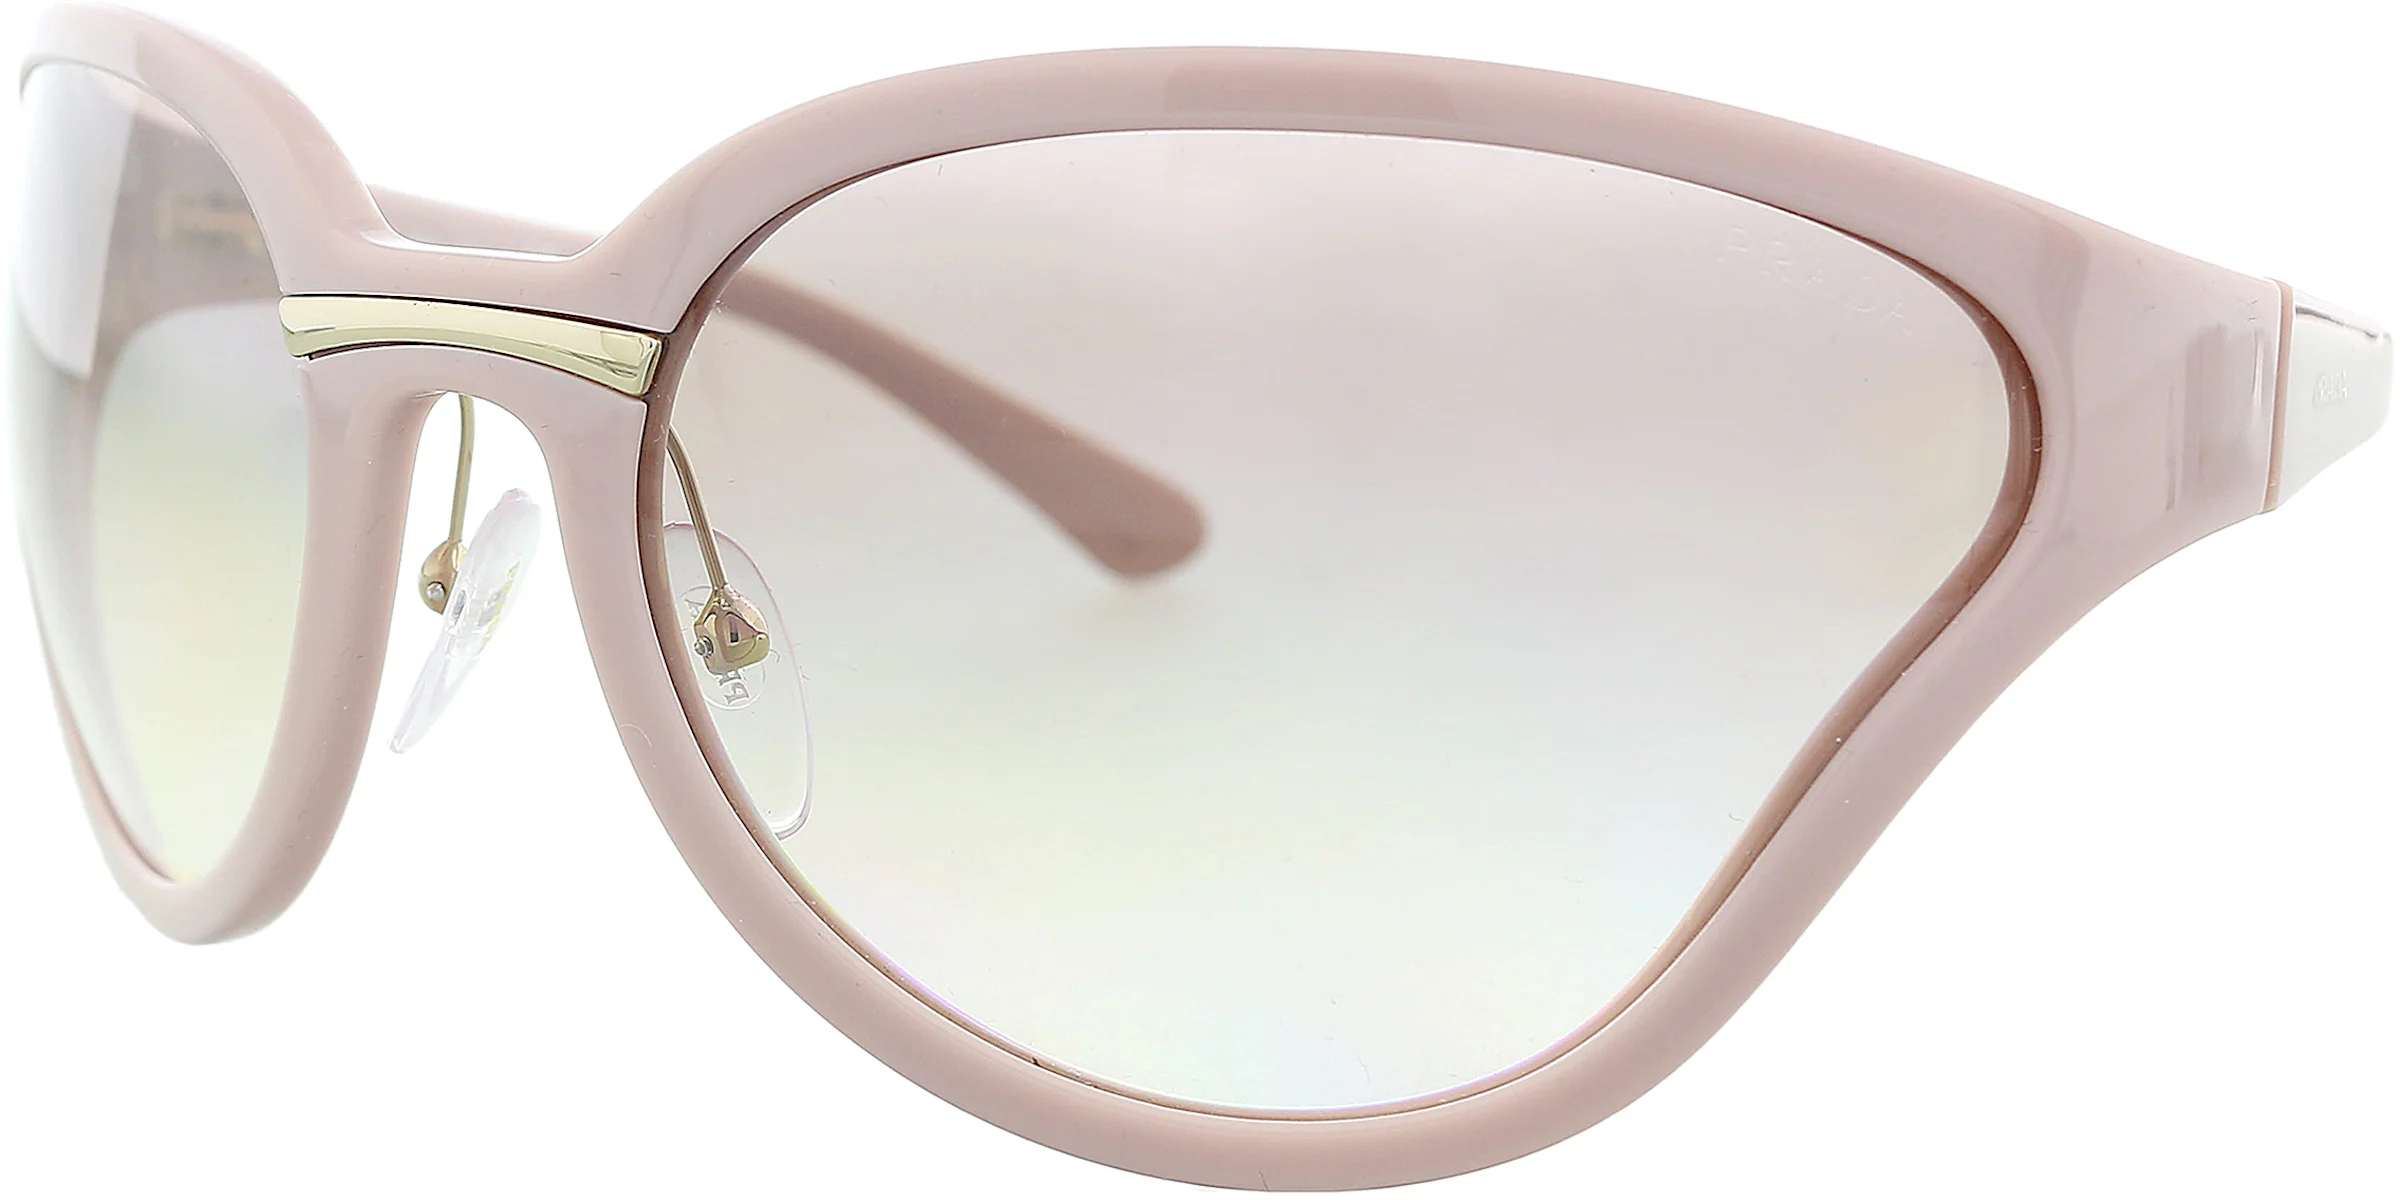 Prada Butterfly Sunglasses Pink (0PR 22VS 5031L0) in Acetate with Gold ...